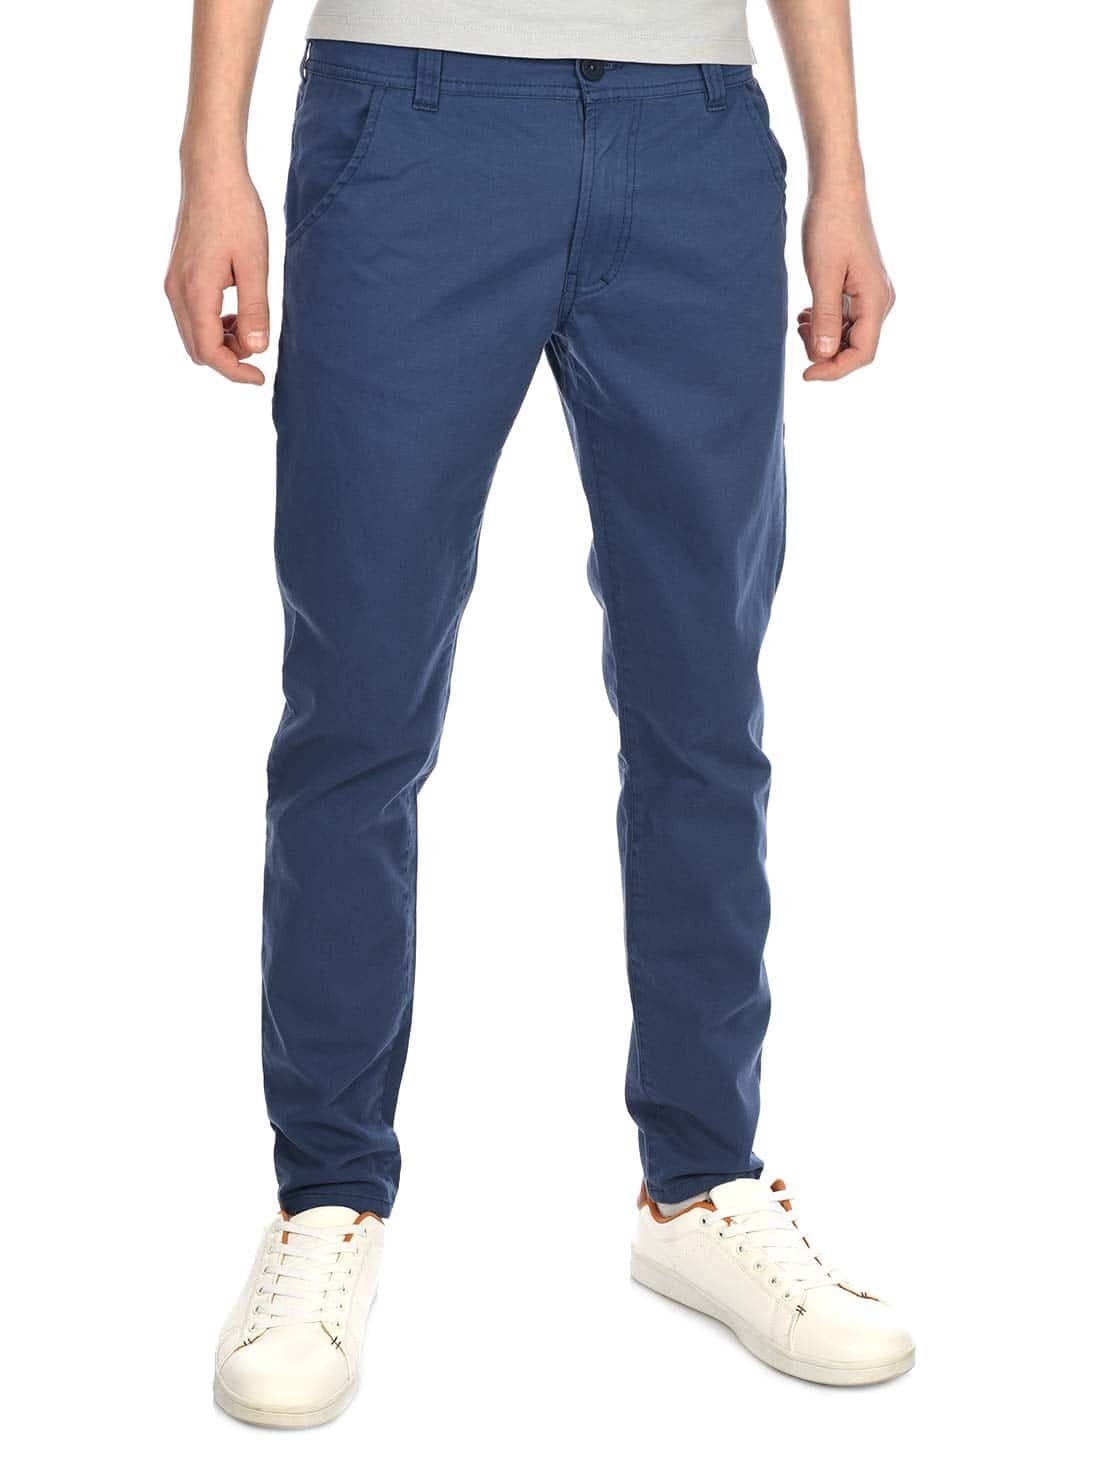 BEZLIT Chinohose Jungen Chino Hose (1-tlg) casual Jeansblau